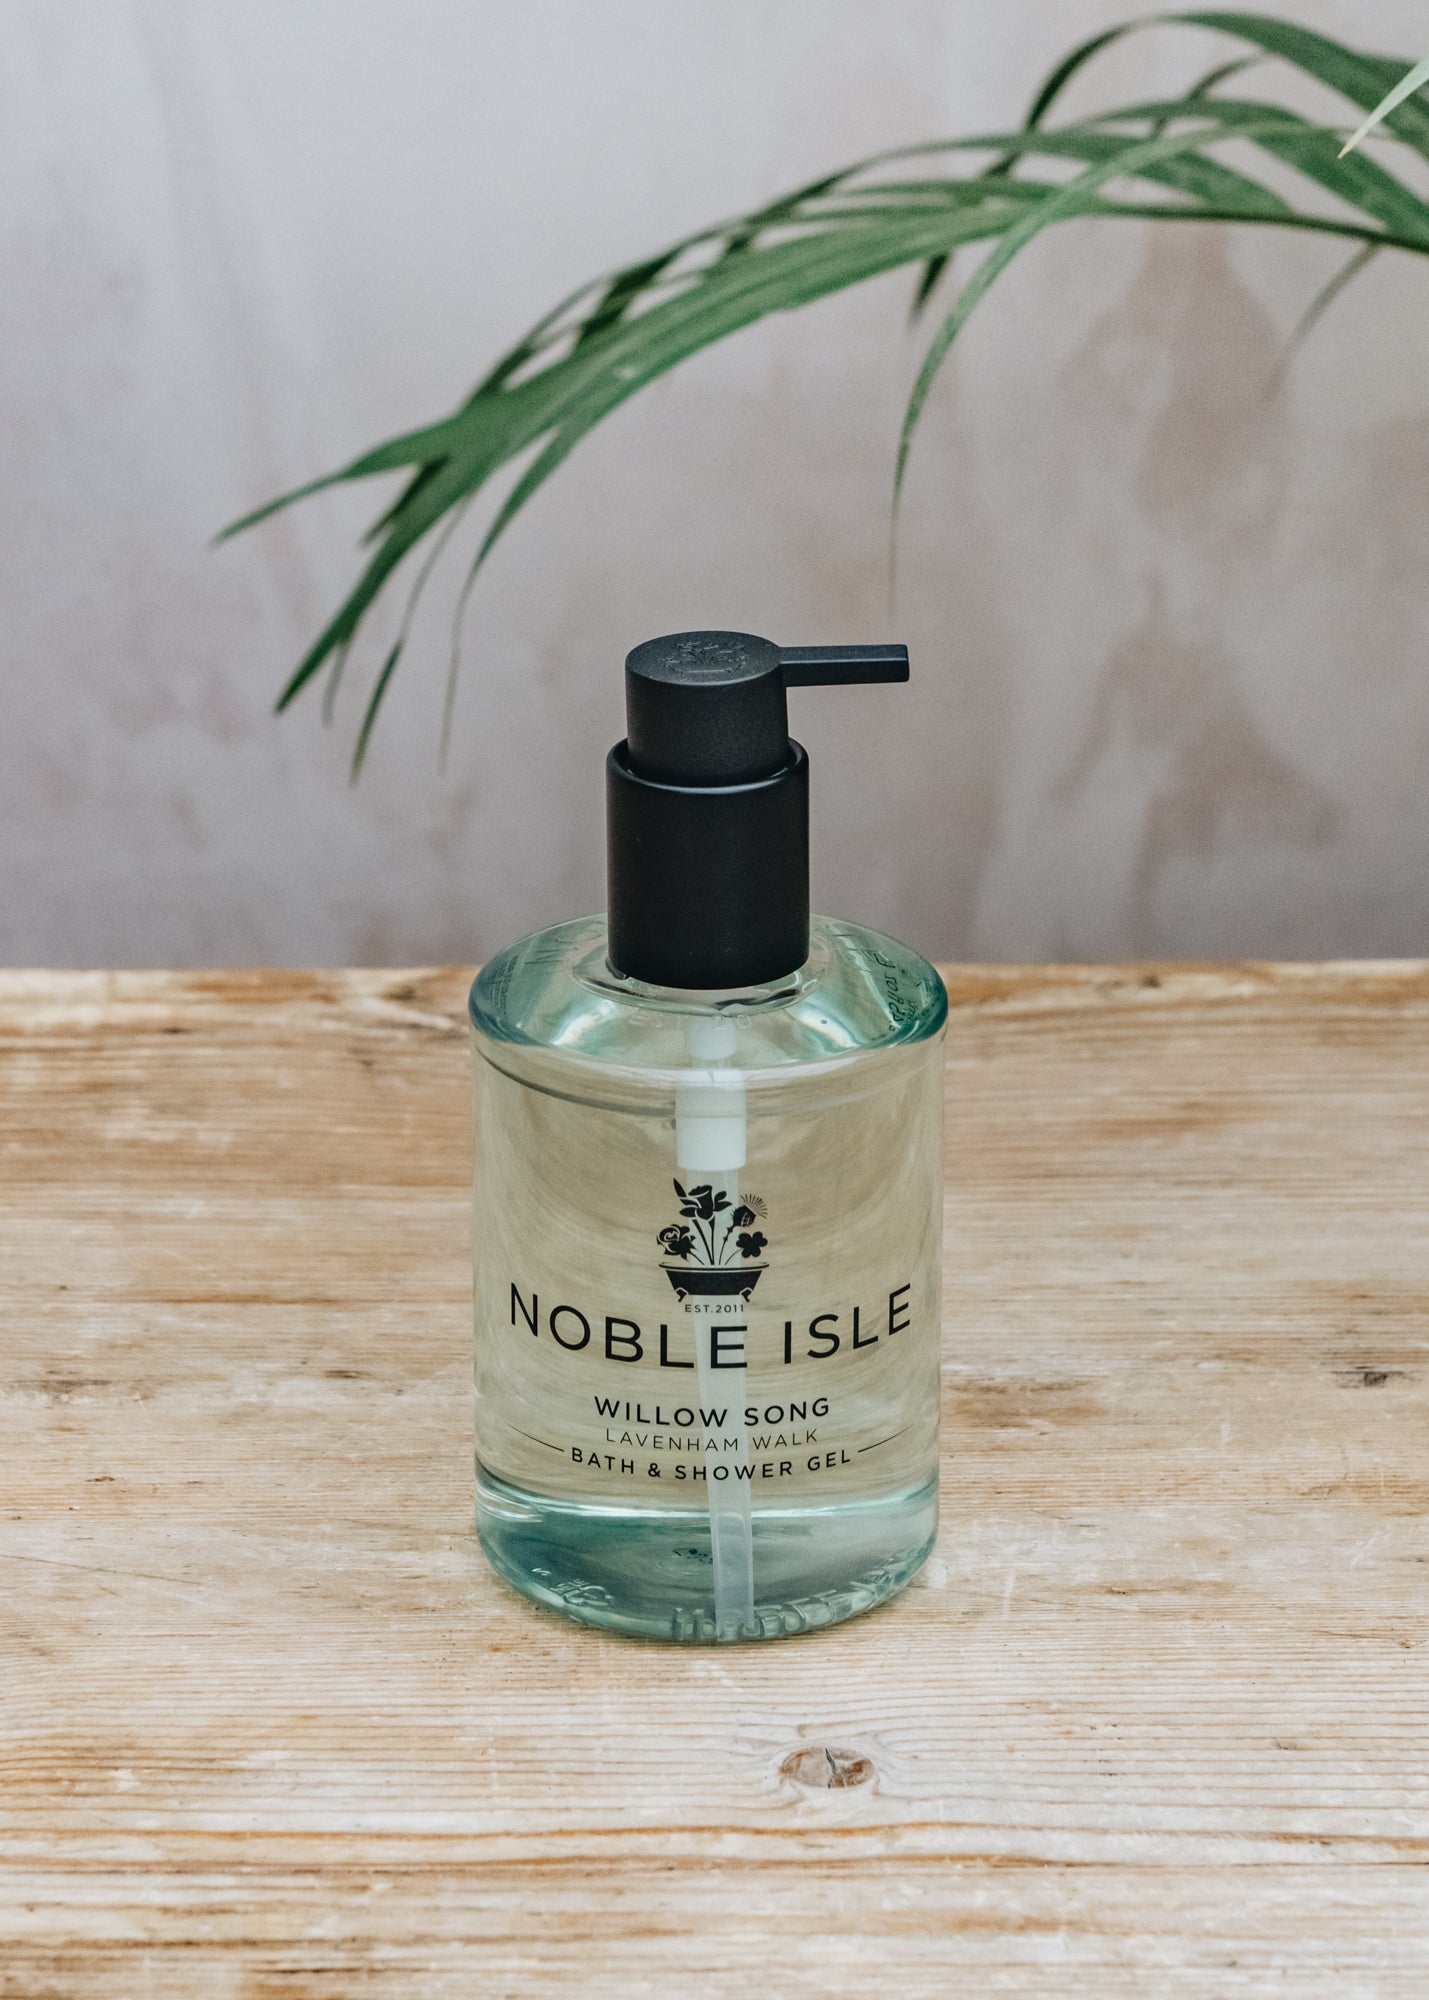 Noble Isle Bath and Shower Gel in Willow Song